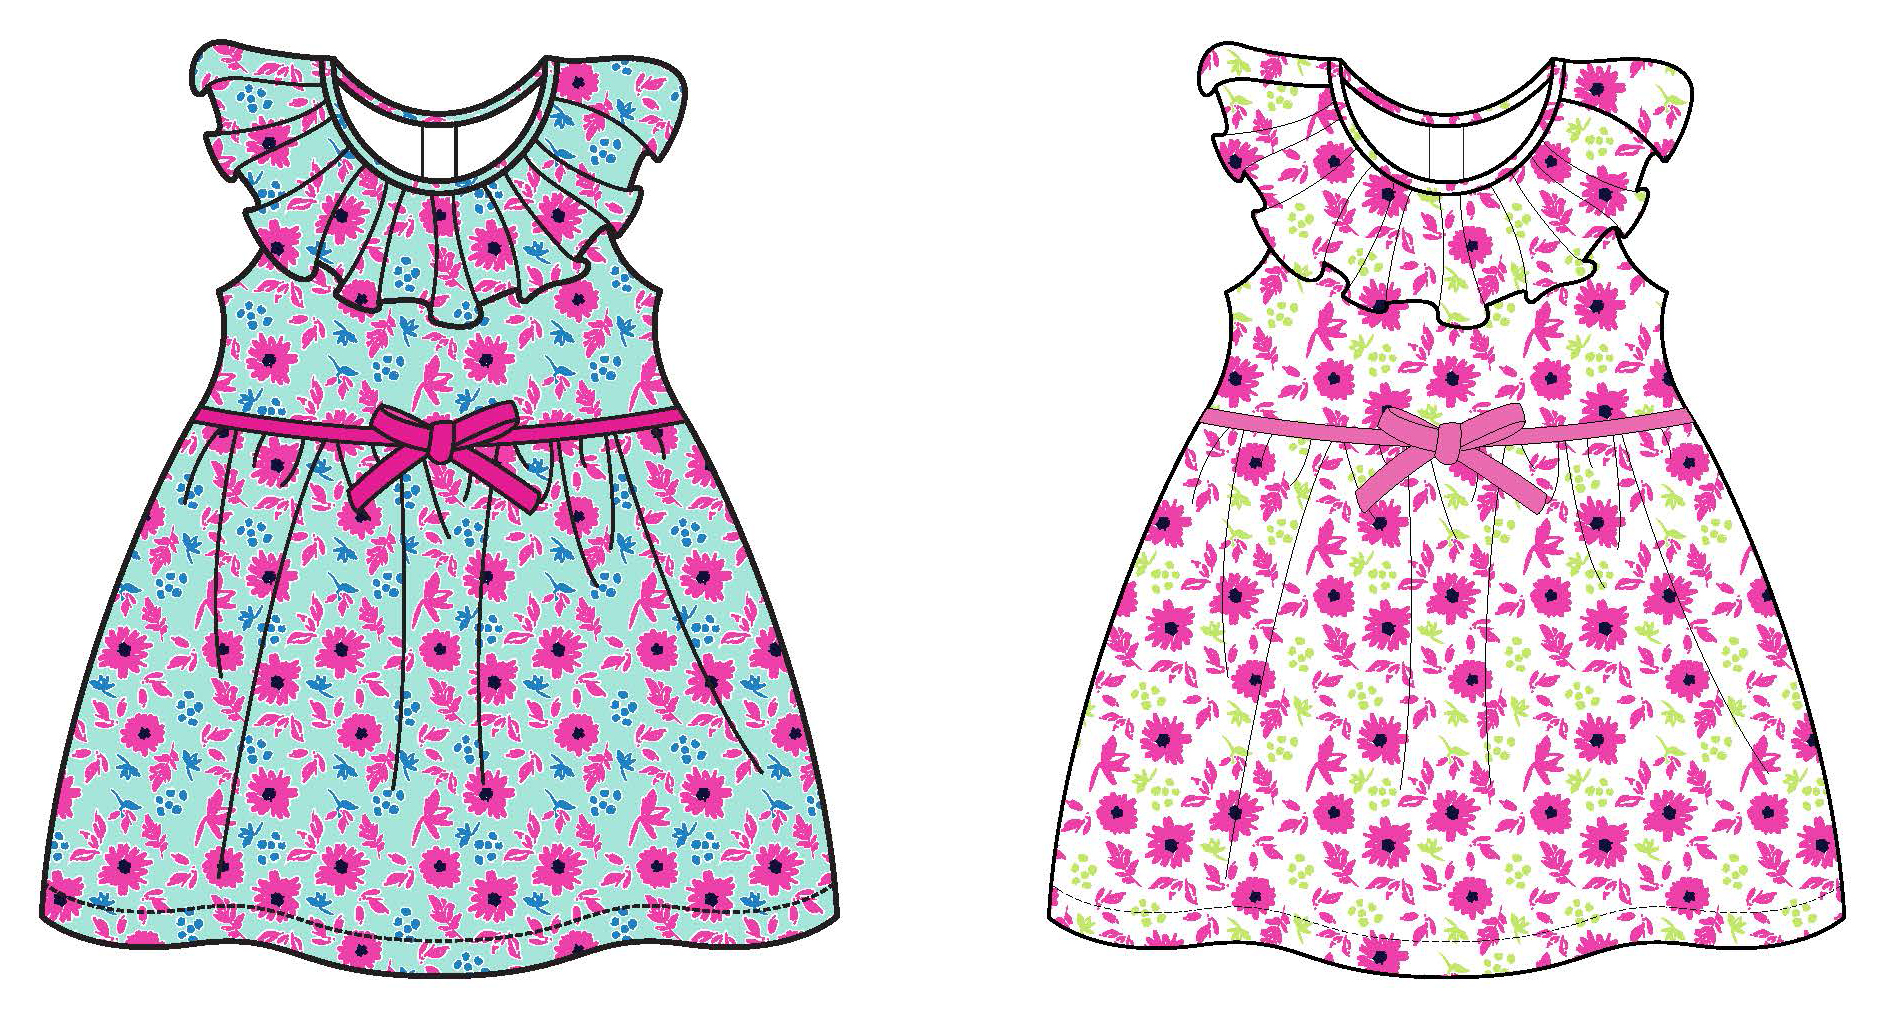 Baby Girl's Printed Knit Sleeveless Dress w/ UNDERWEAR Panty & Embroidered Ribbon - Liberty Floral P